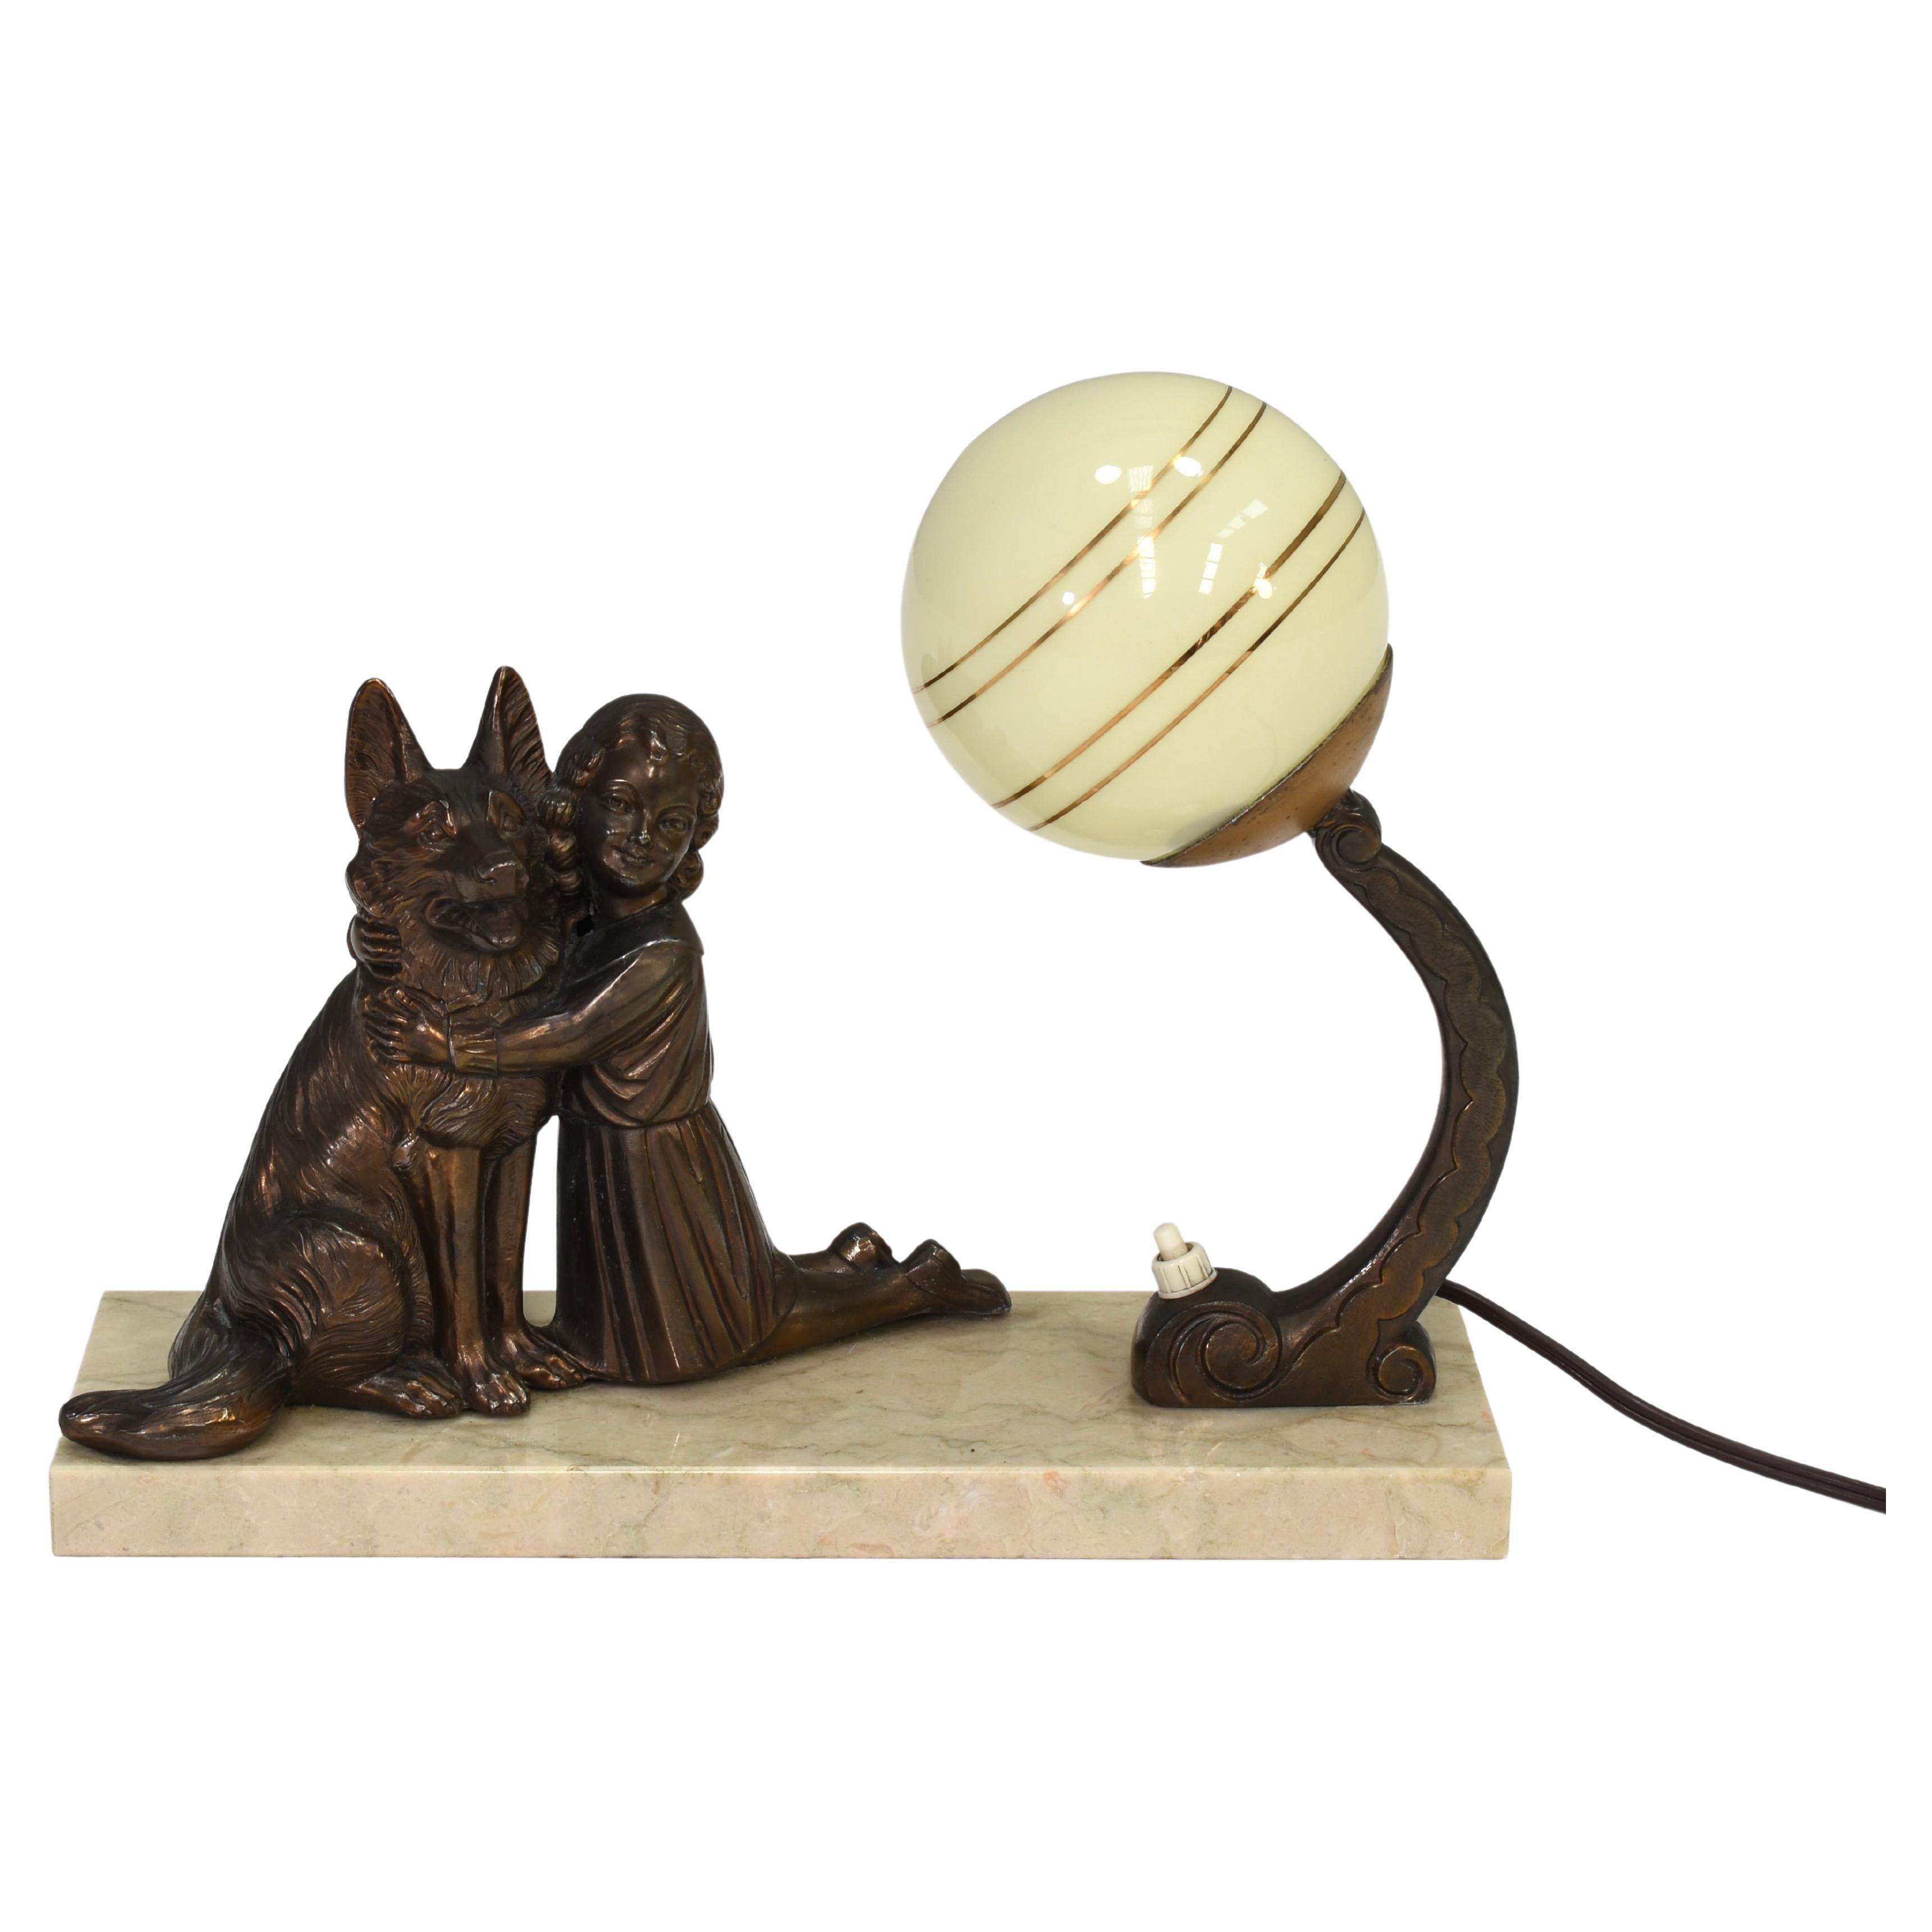 French Art Deco Desk Table Lamp Girl and German Shepherd Sculpture, circa 1930 For Sale